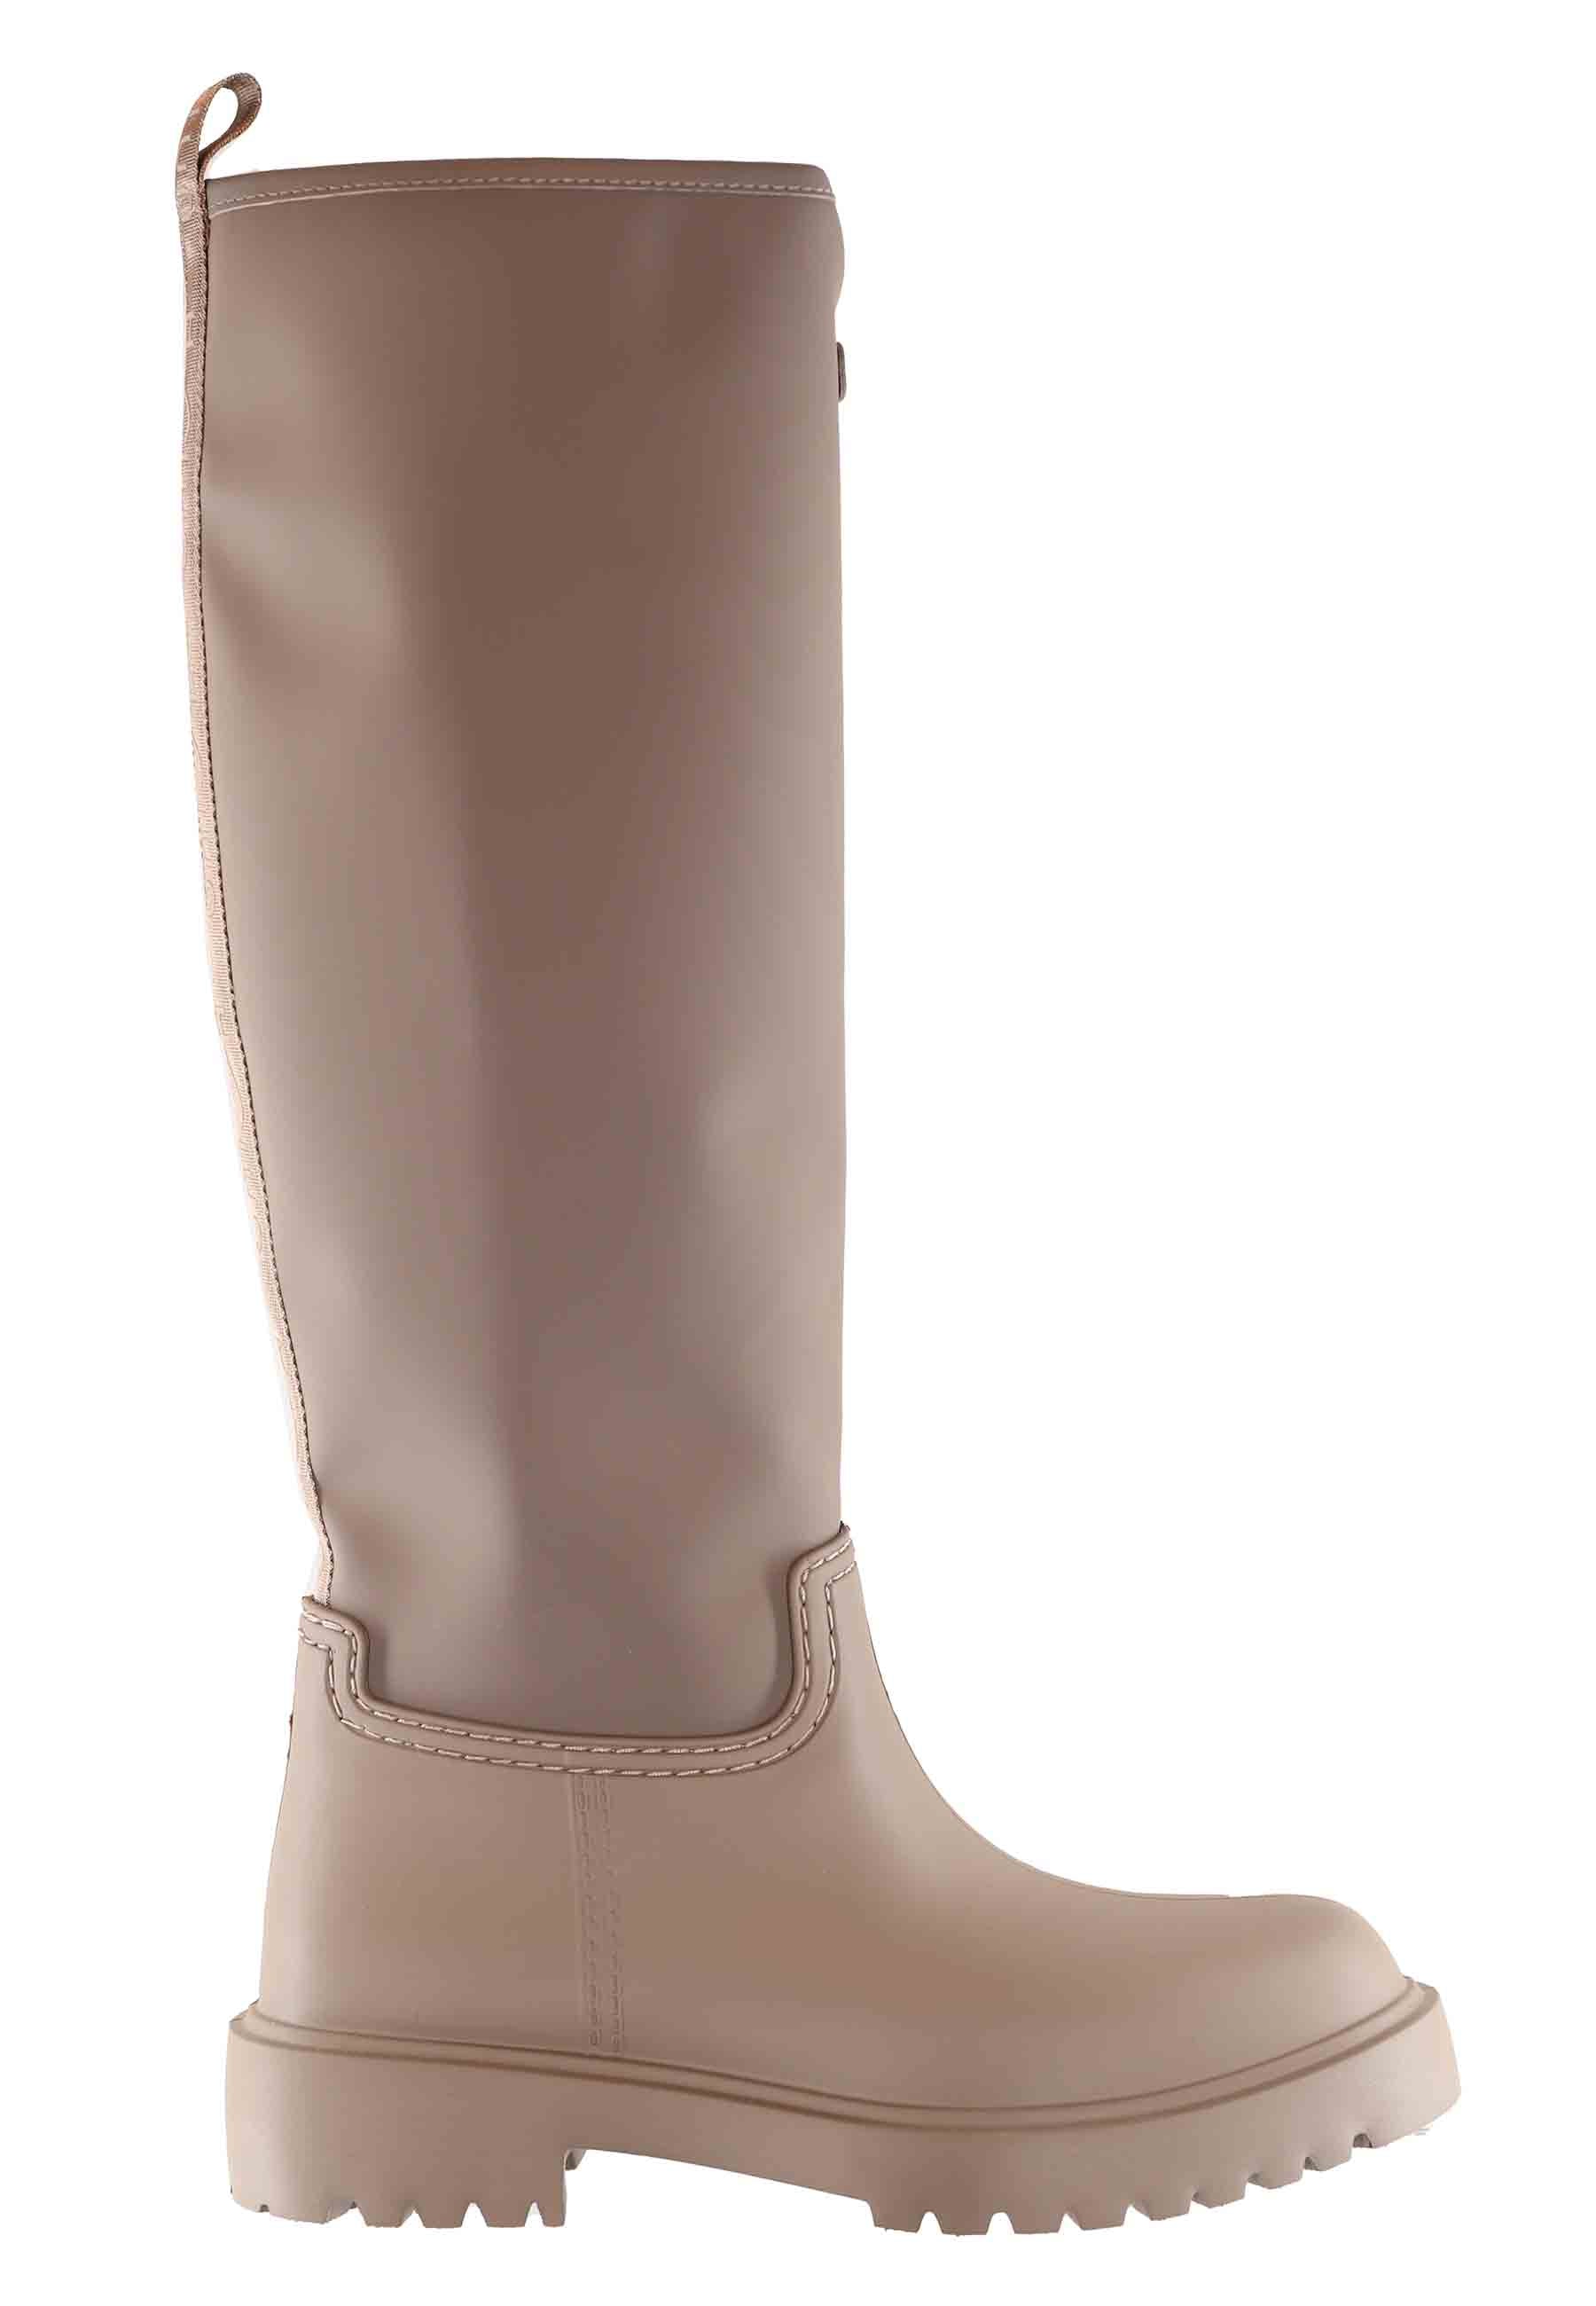 Women's rain tube boots in PVC and taupe fabric